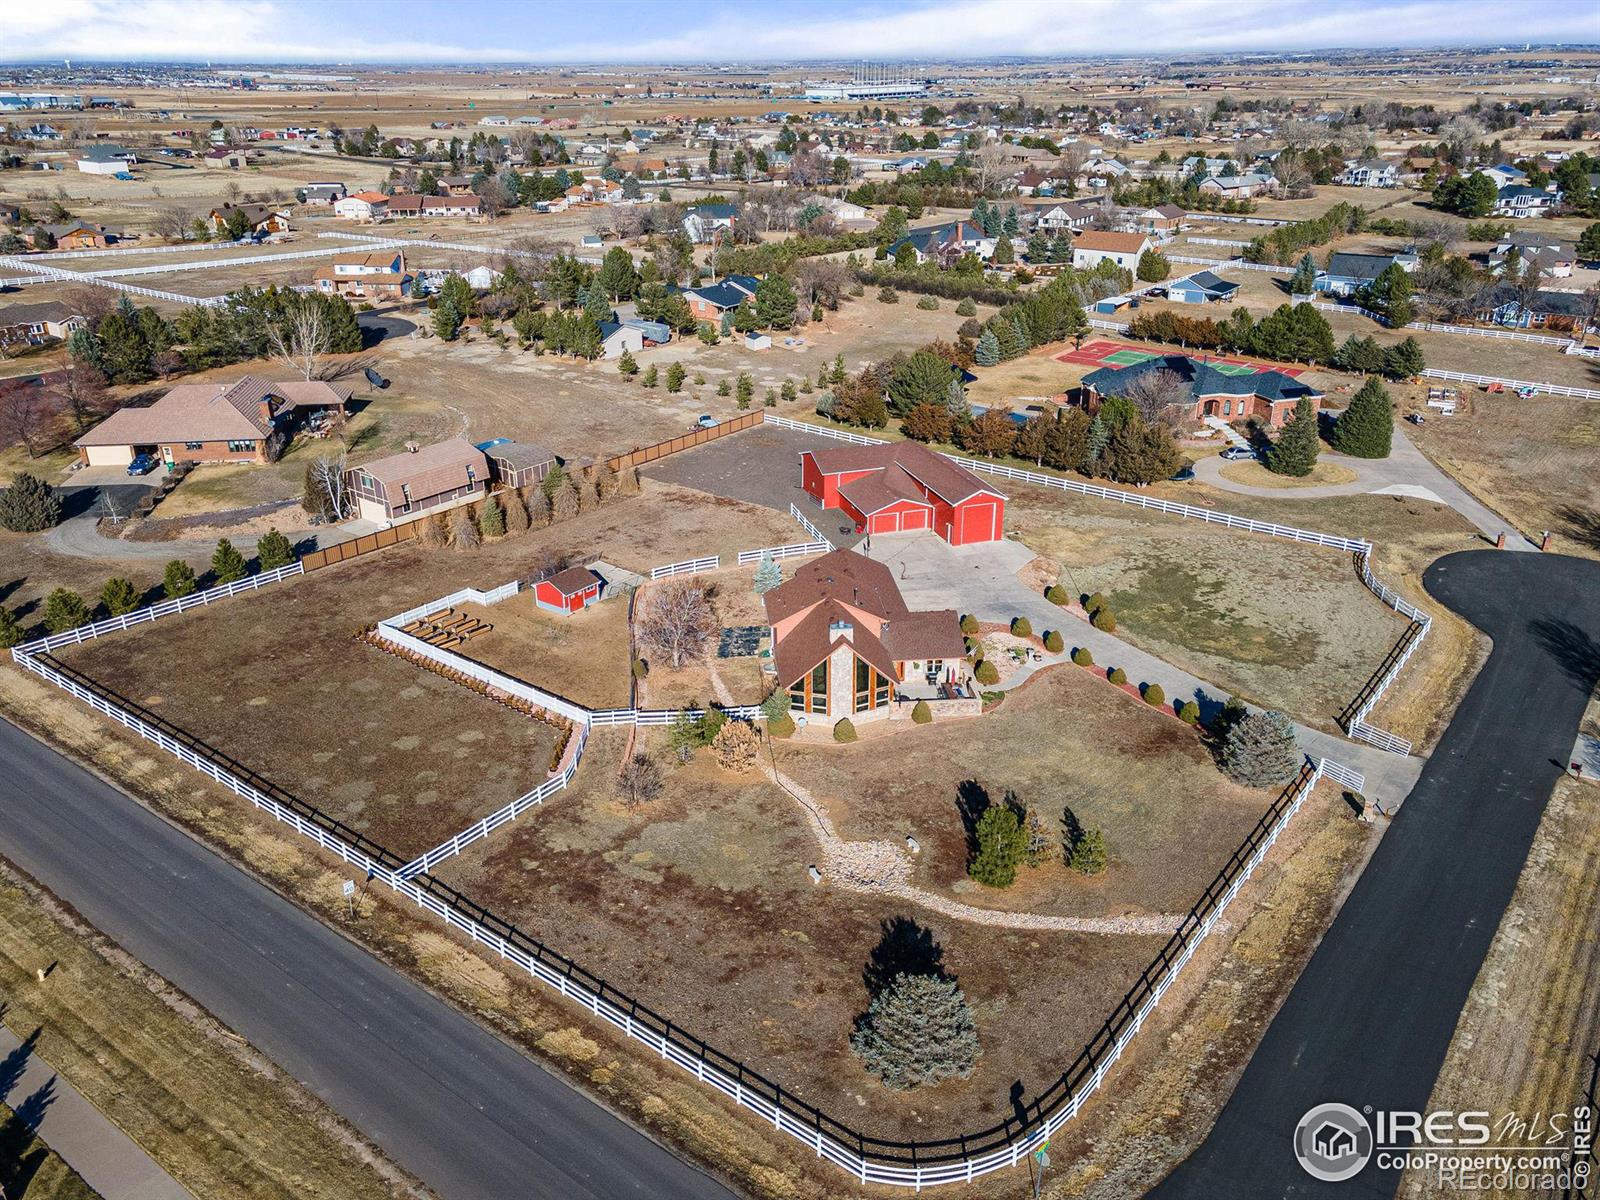 2351 W 152nd Place, broomfield MLS: 4567891004007 Beds: 5 Baths: 4 Price: $1,650,000